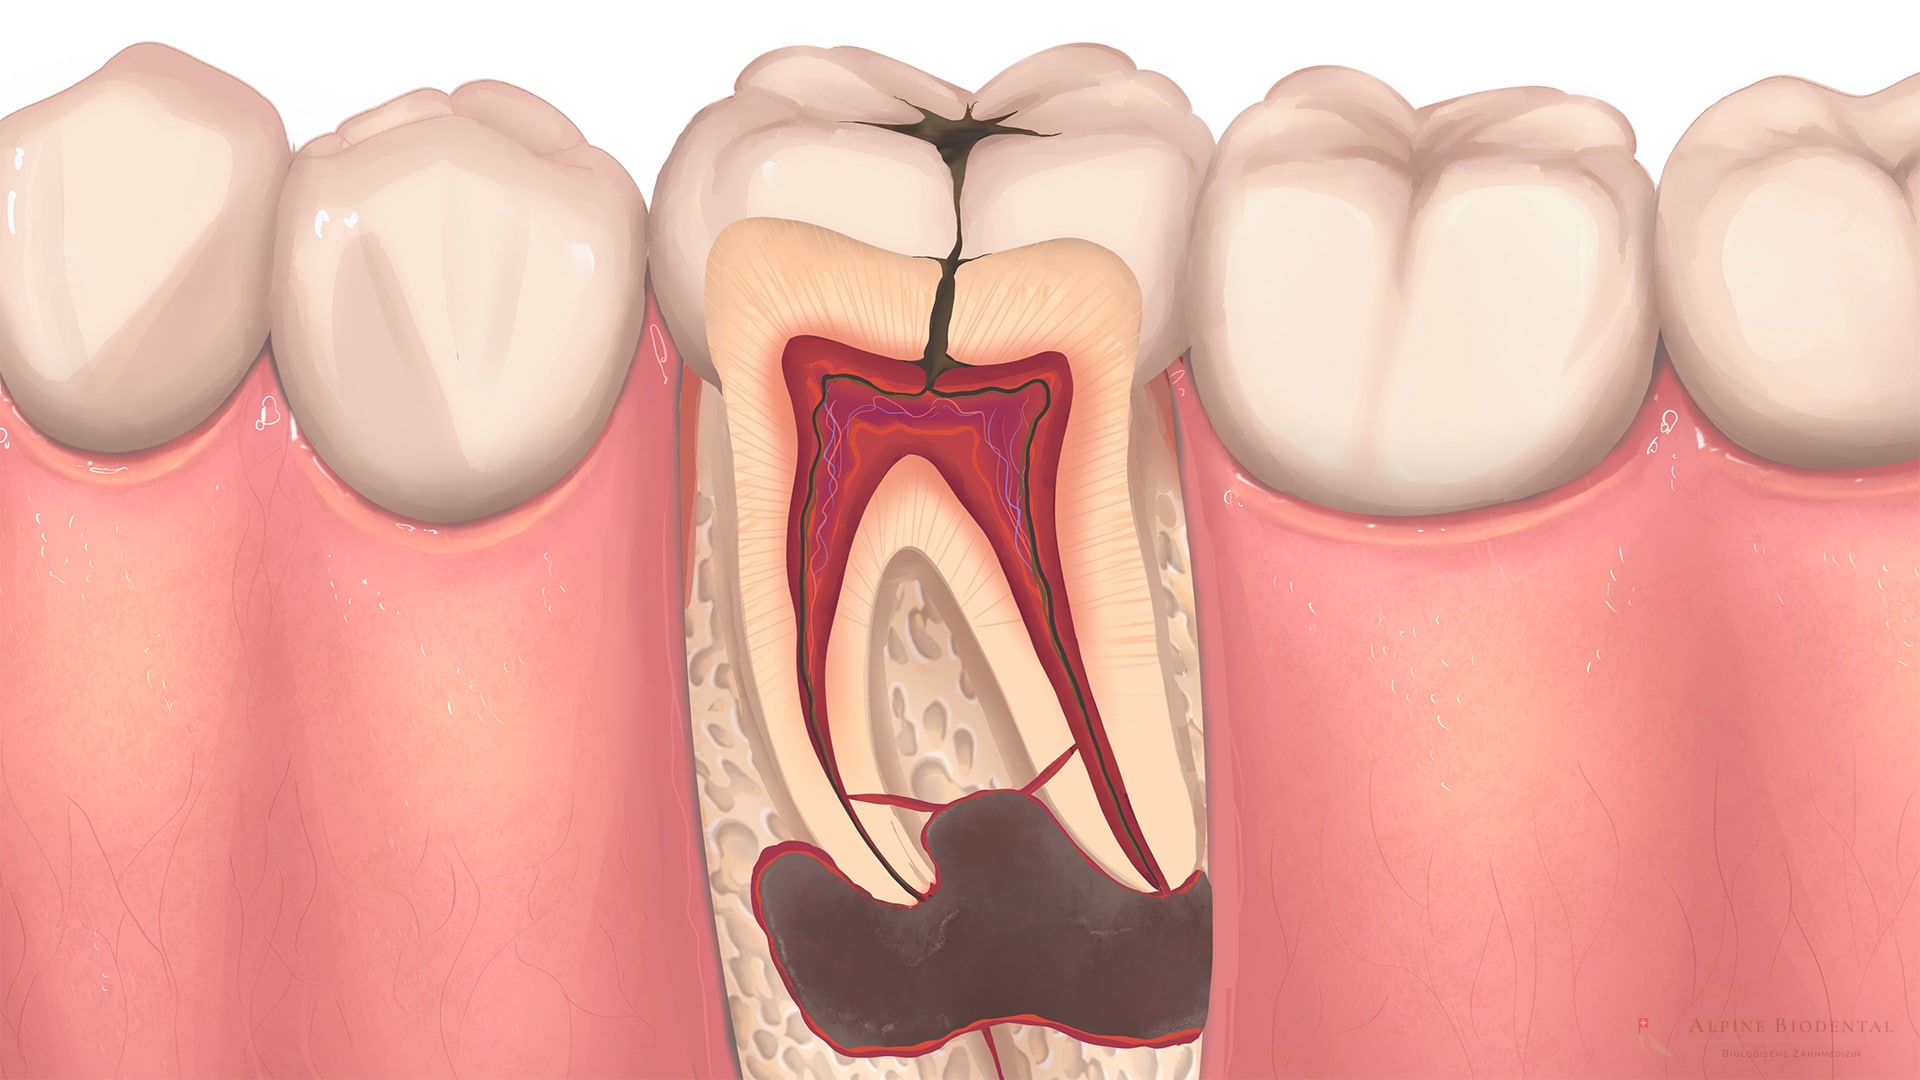 Representative 3D images of the root canal system and the outer tooth